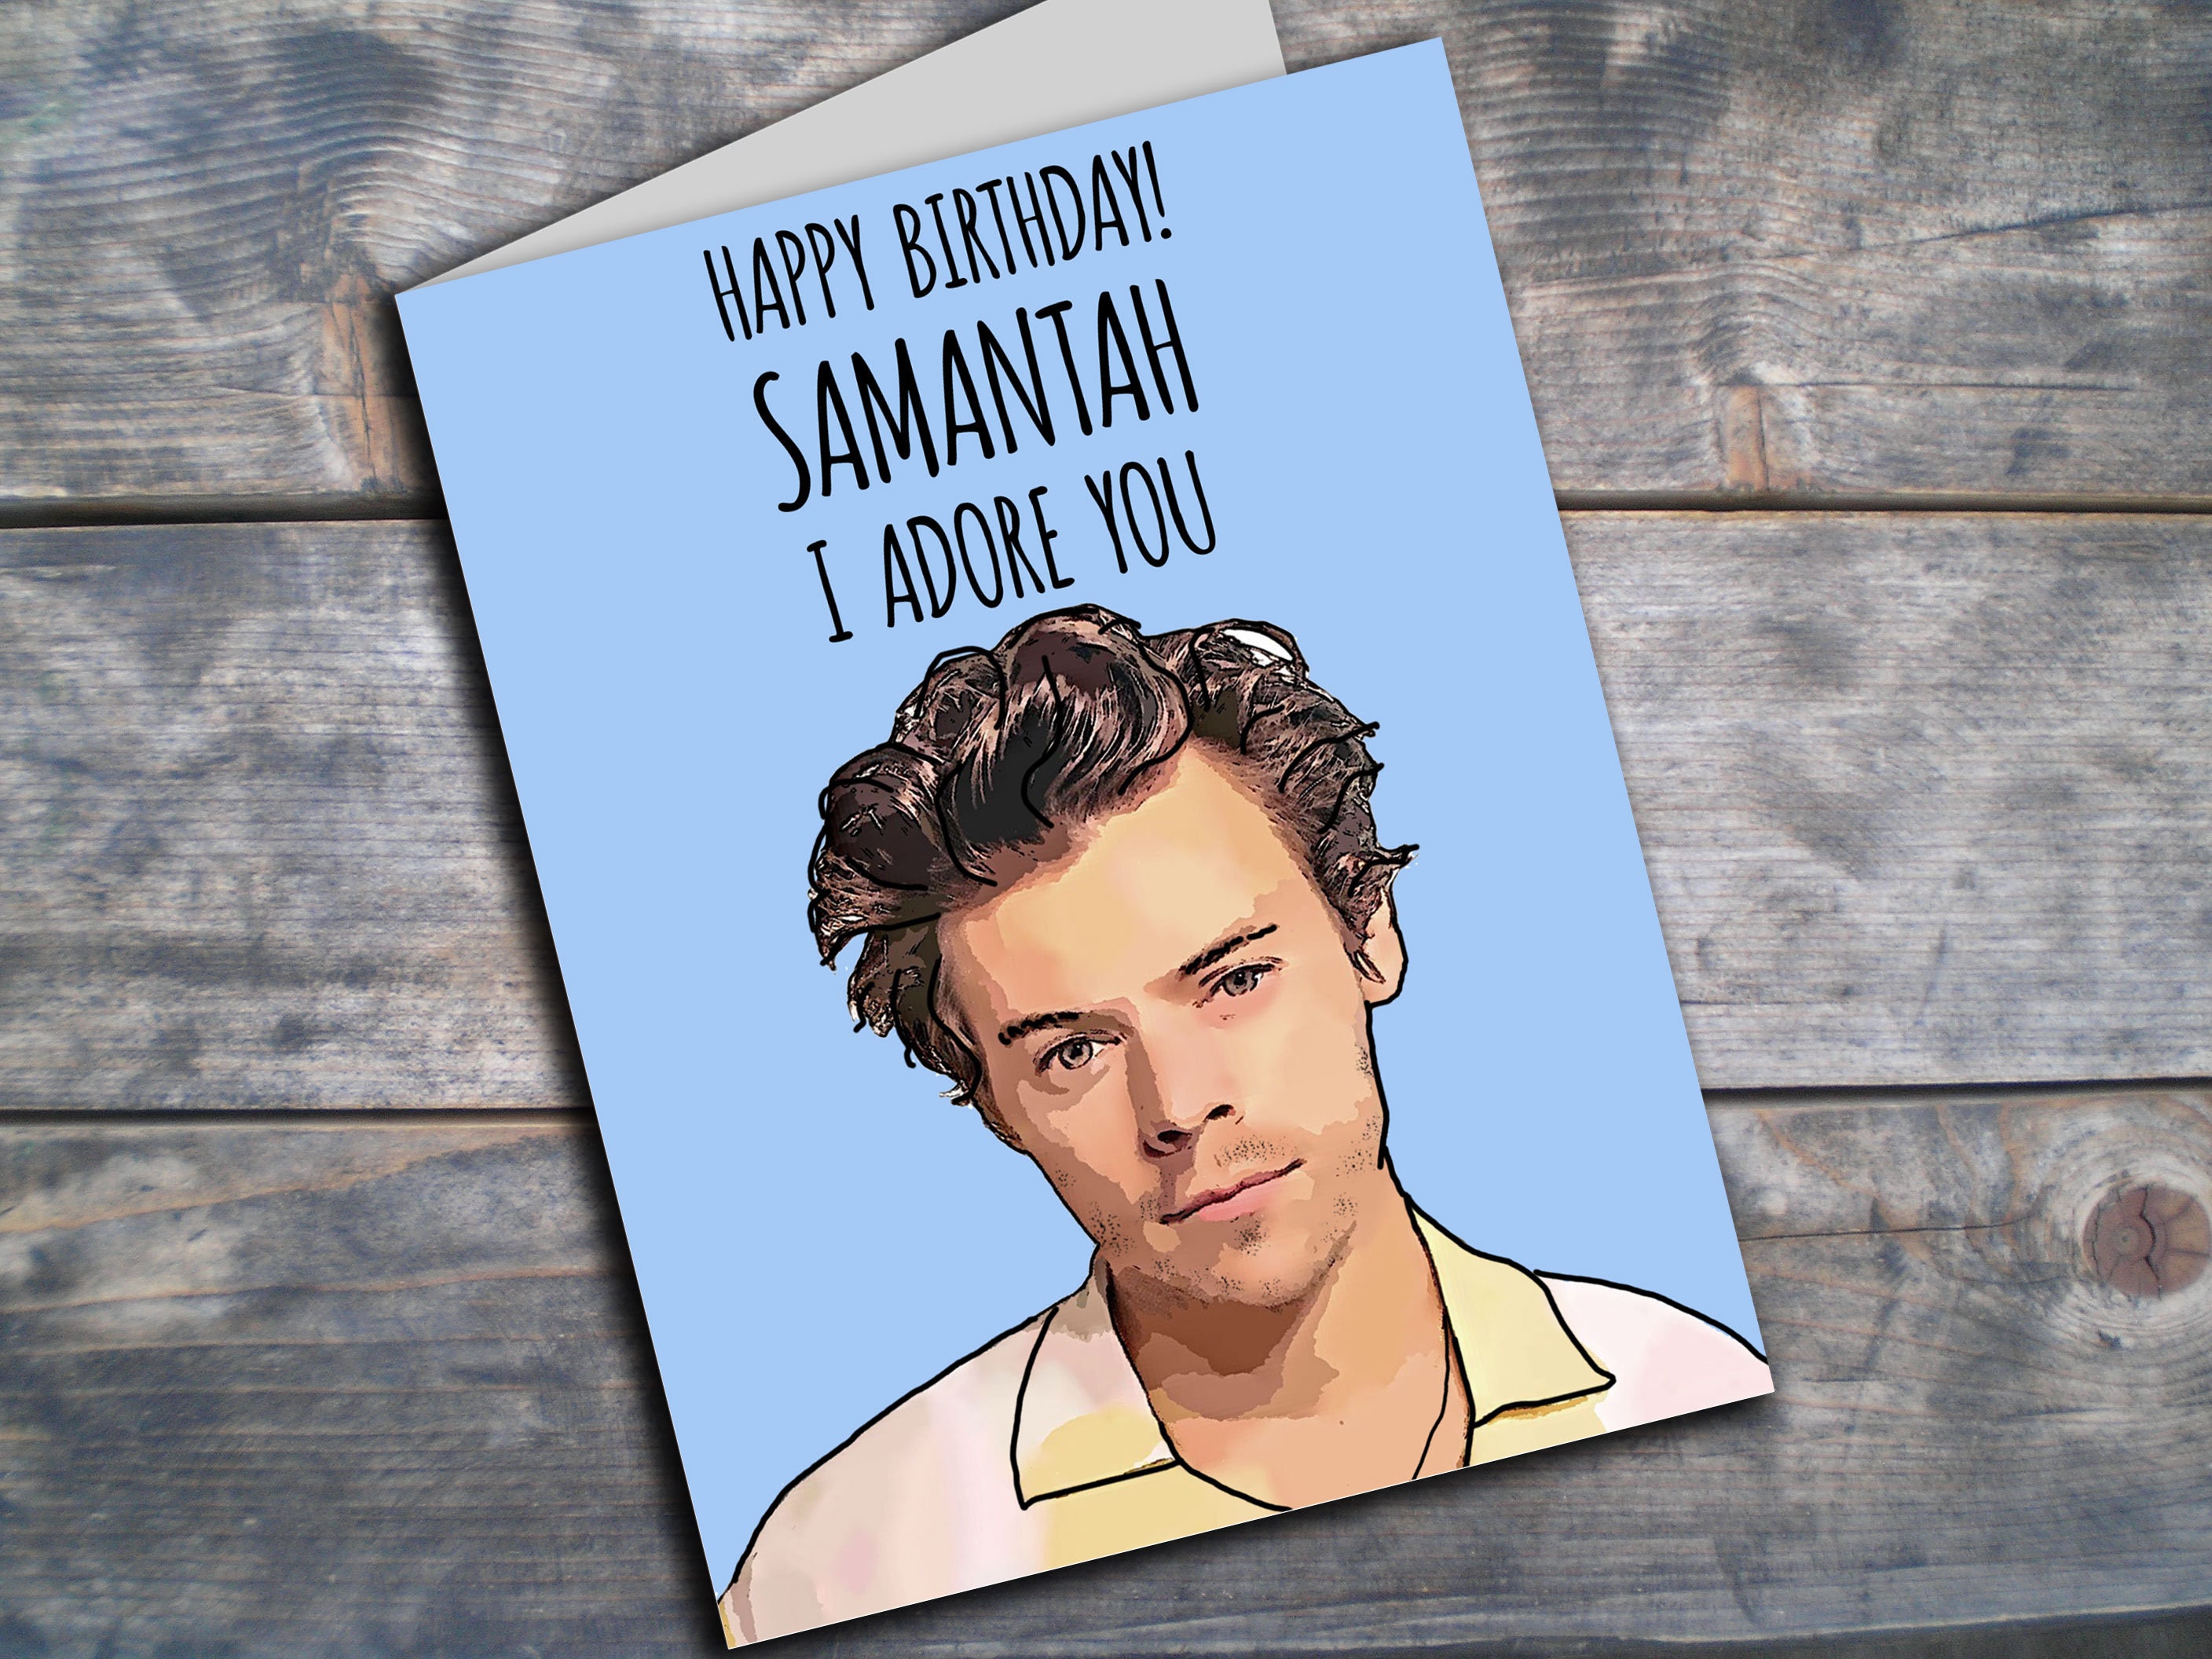 harry-styles-red-birthday-card-celebrity-facemaskscom-harry-styles